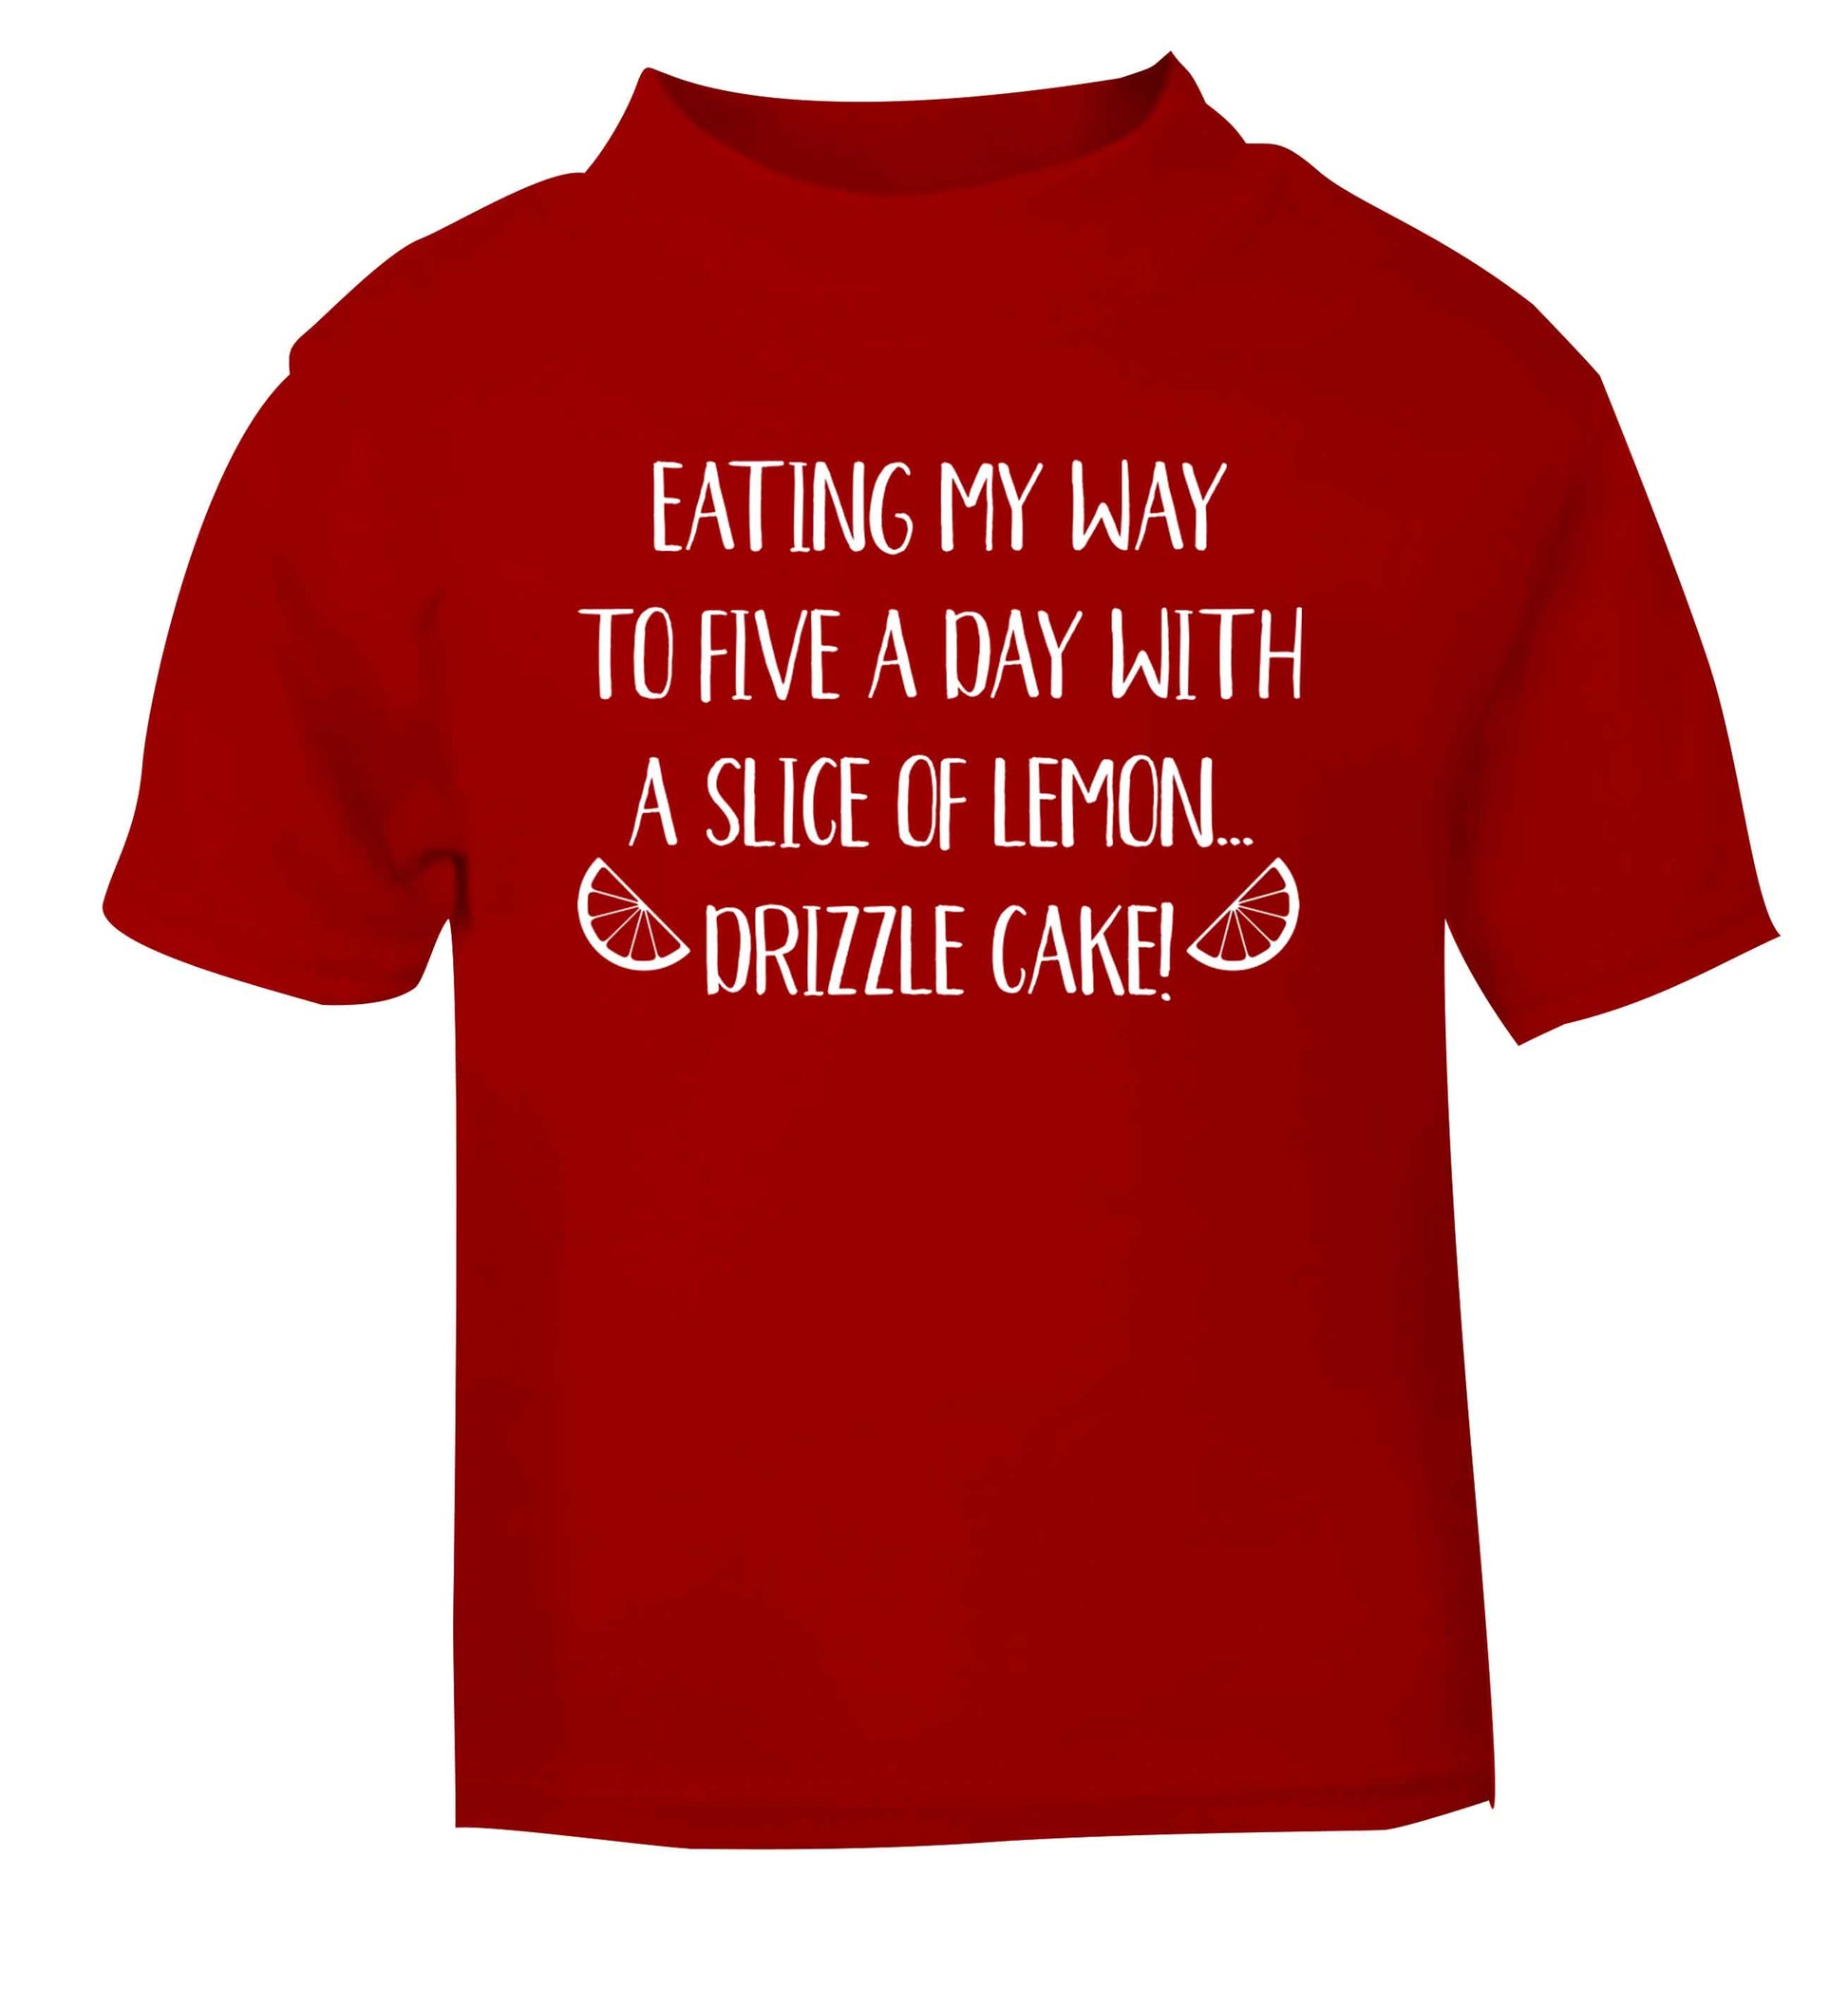 Eating my way to five a day with a slice of lemon drizzle cake day red Baby Toddler Tshirt 2 Years